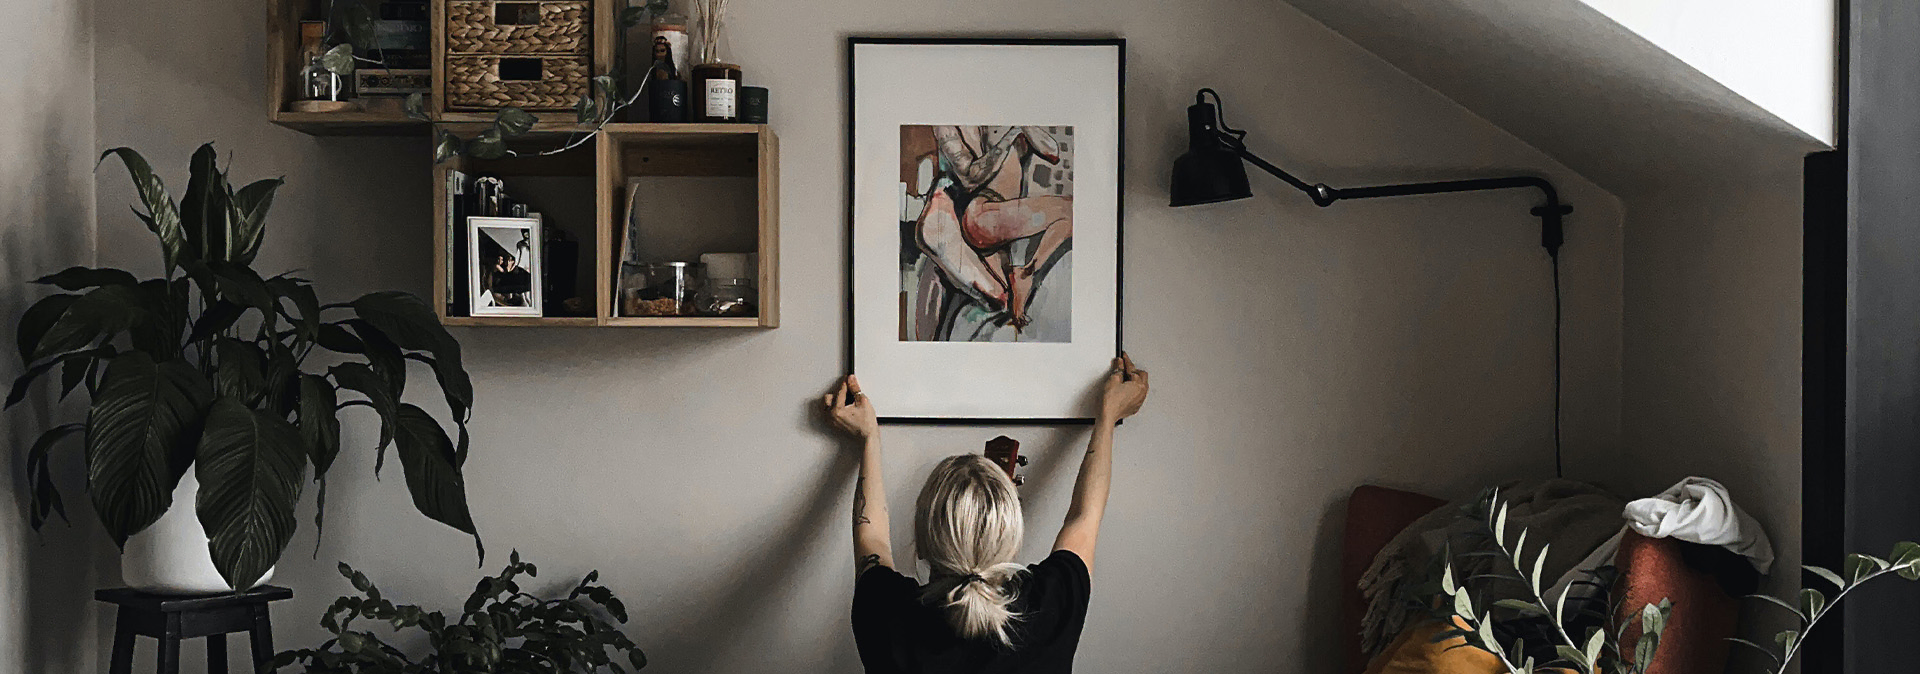 girl hanging picture on the wall